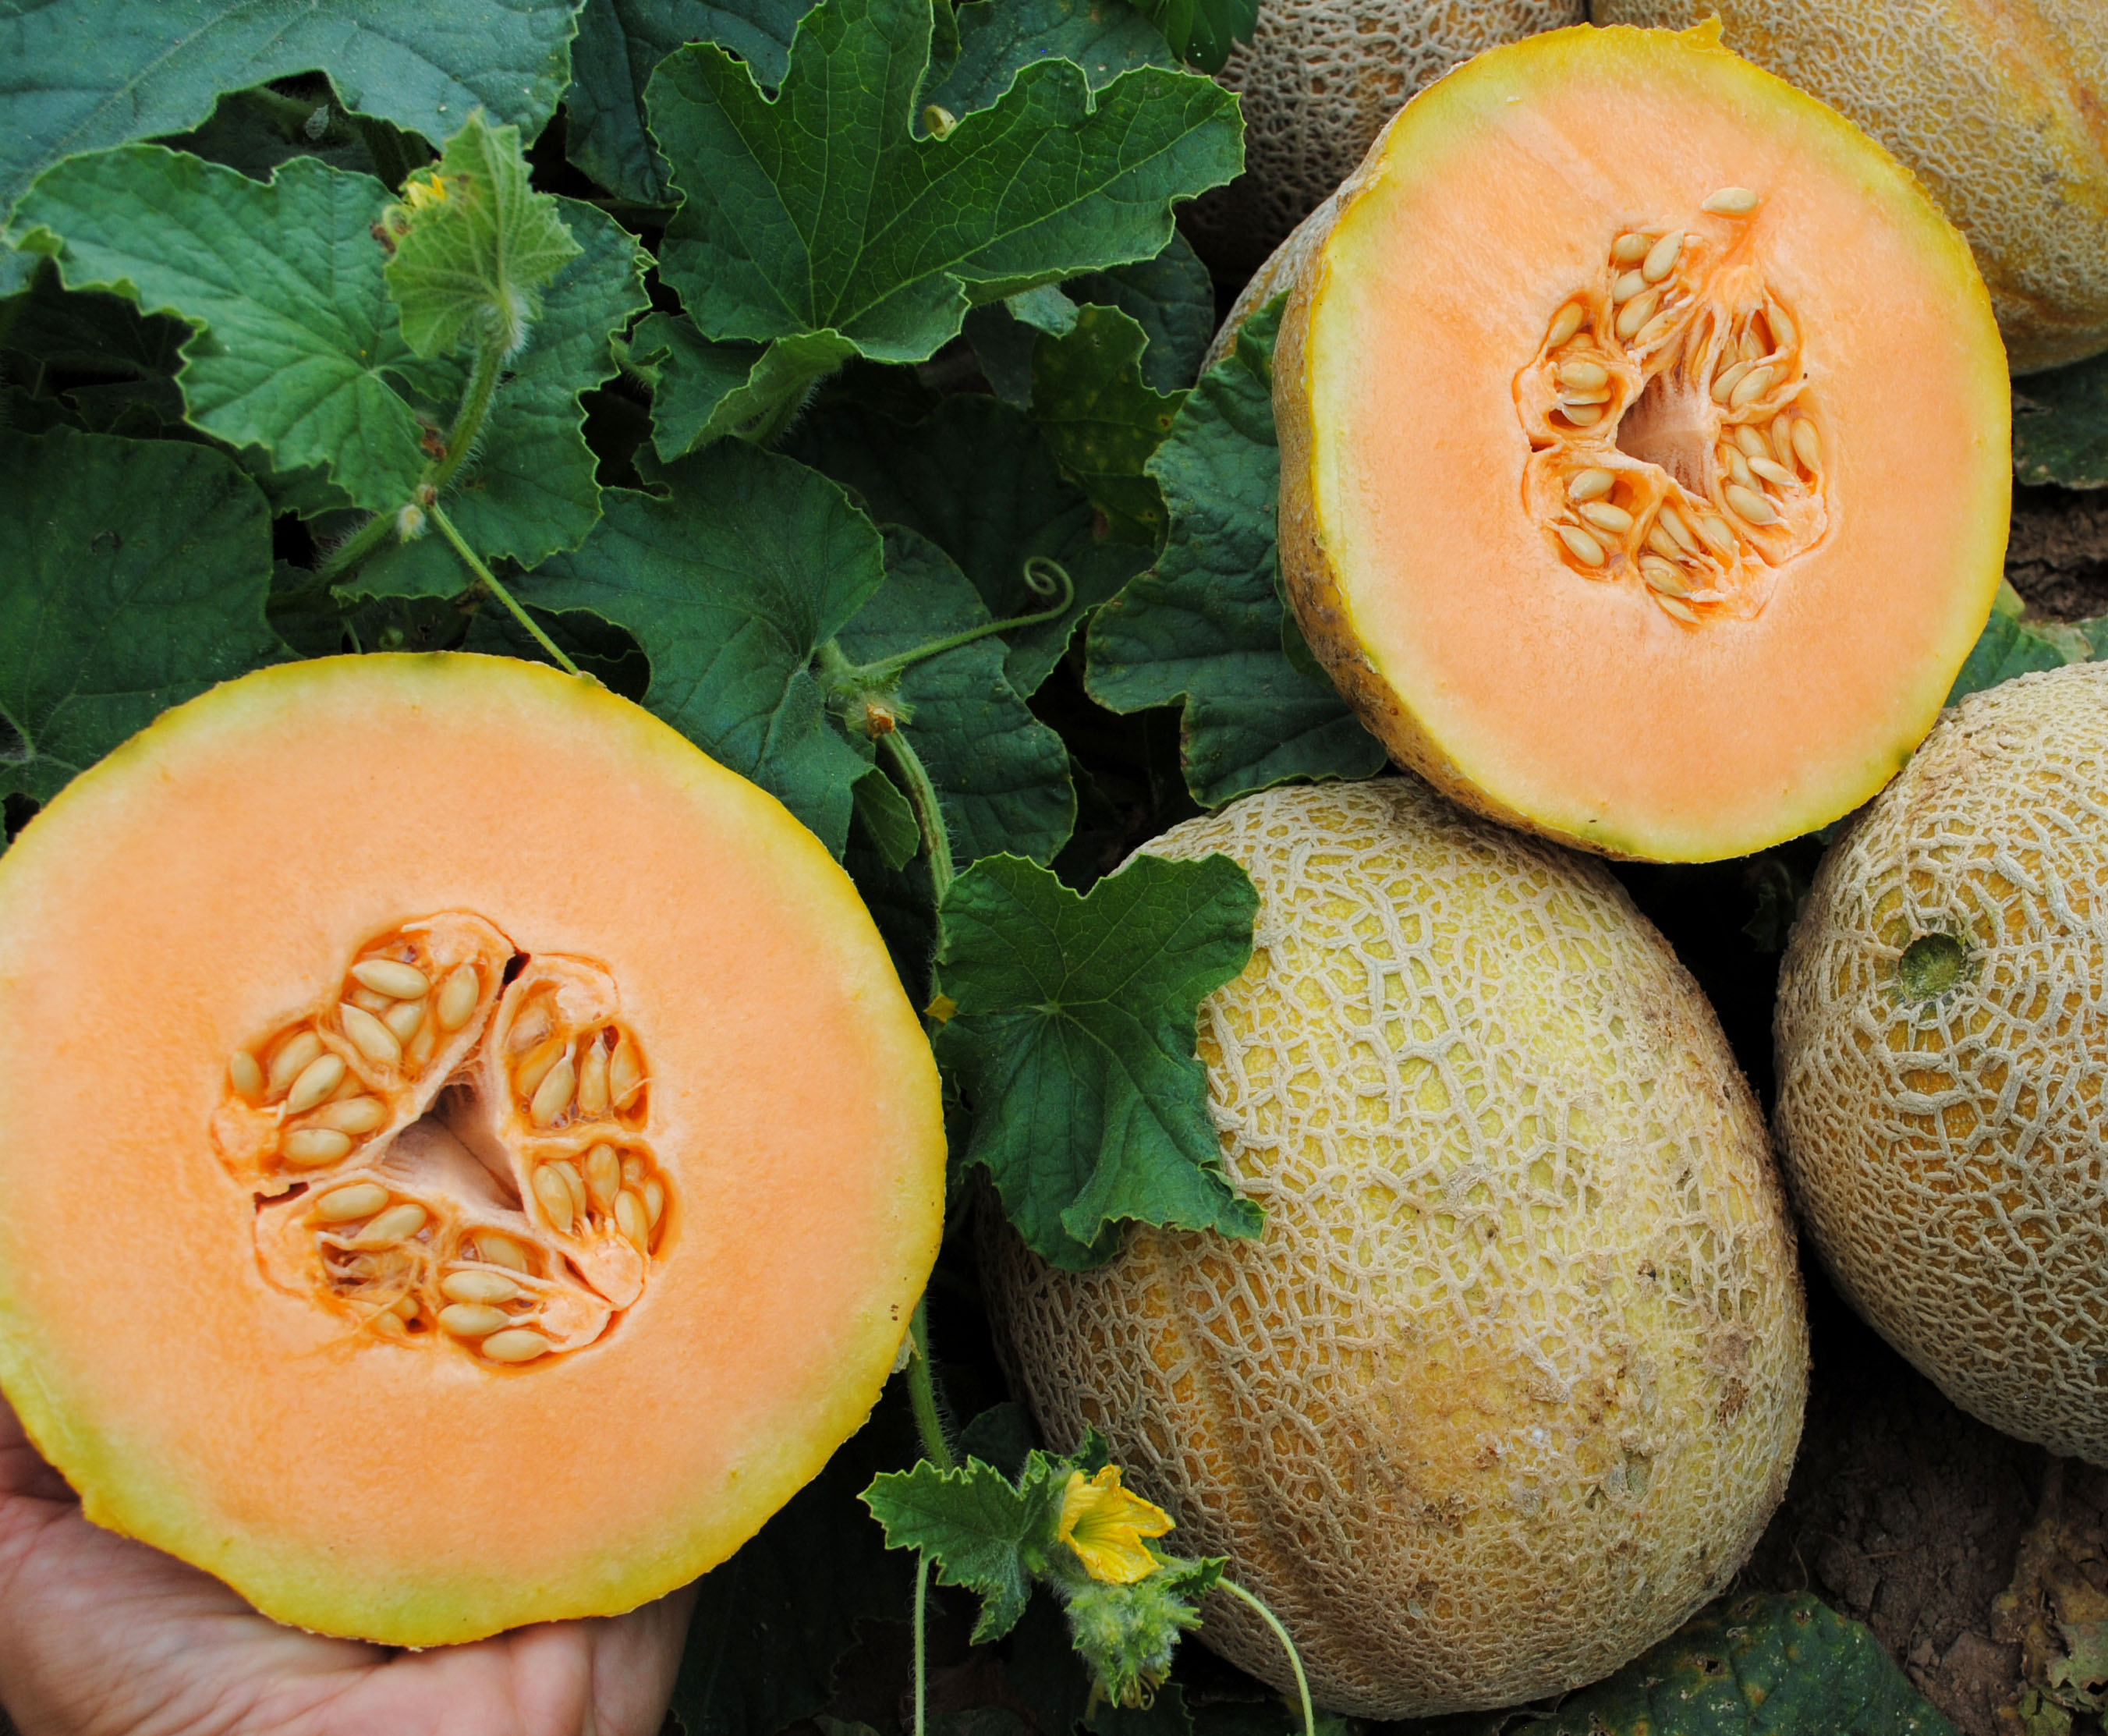 Sweet Passion Muskmelon, 2 g : Southern Exposure Seed Exchange, Saving